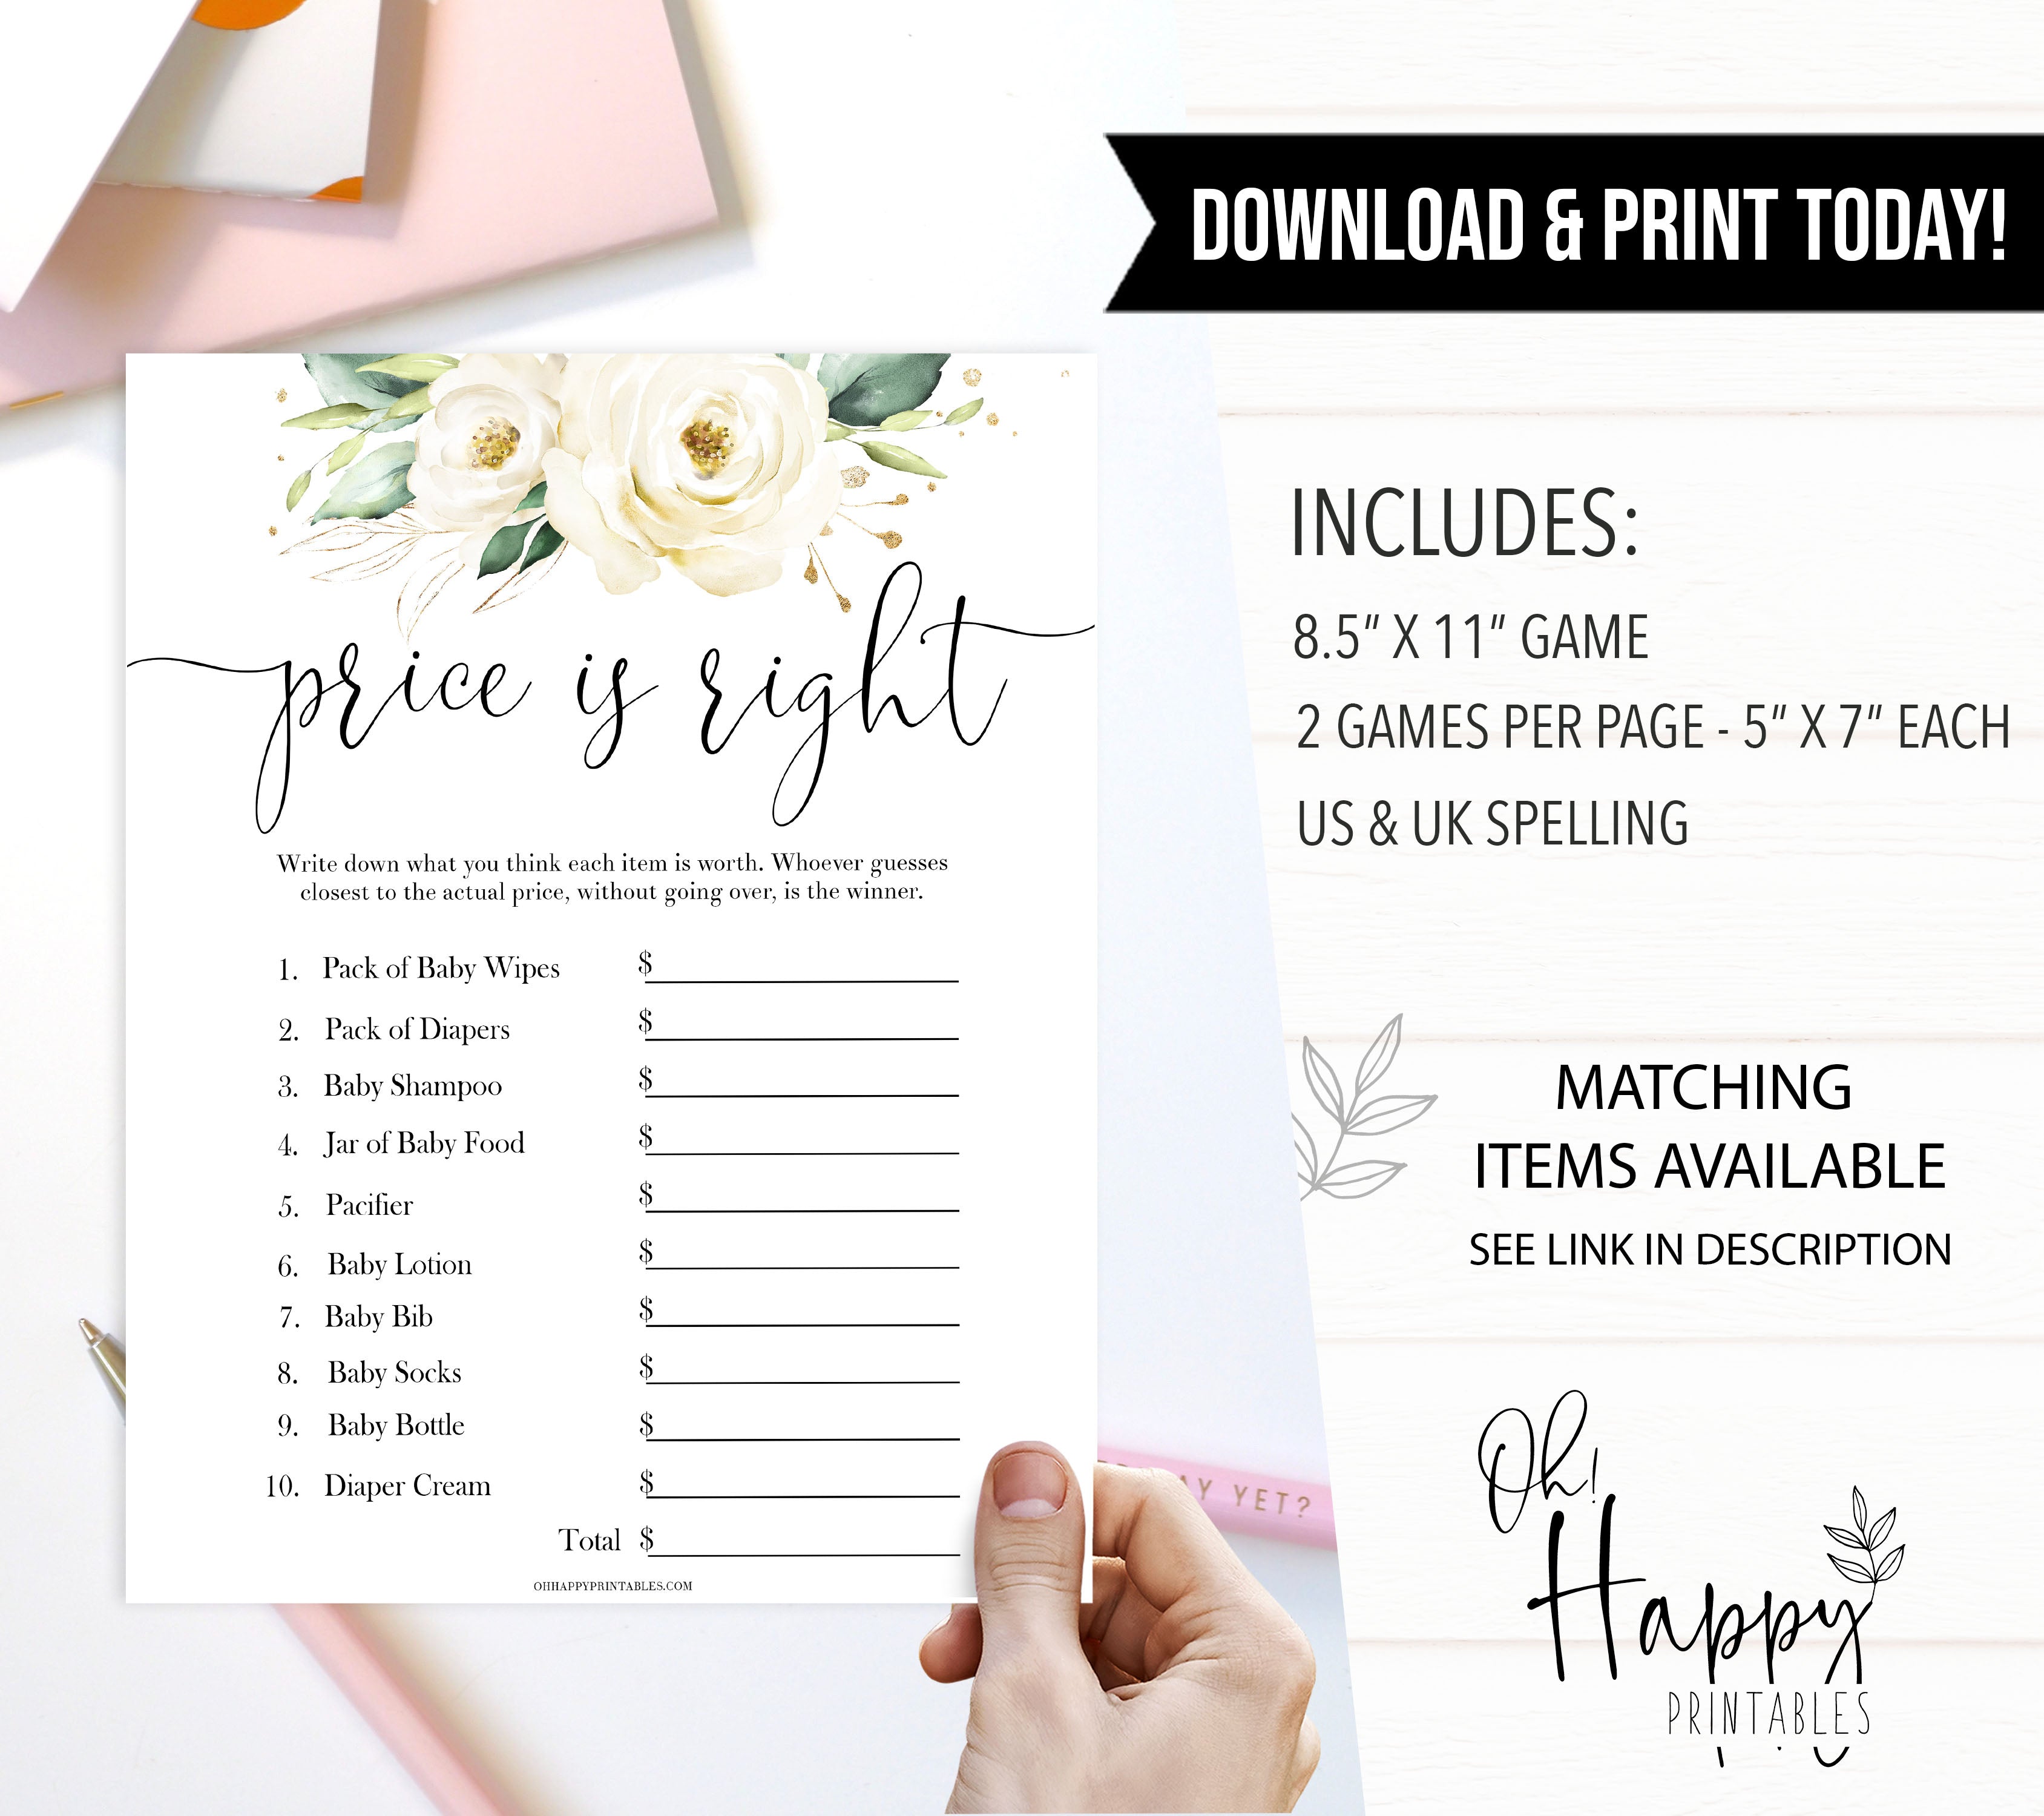 baby shower price is right game, Printable baby shower games, shite floral baby games, baby shower games, fun baby shower ideas, top baby shower ideas, floral baby shower, baby shower games, fun floral baby shower ideas